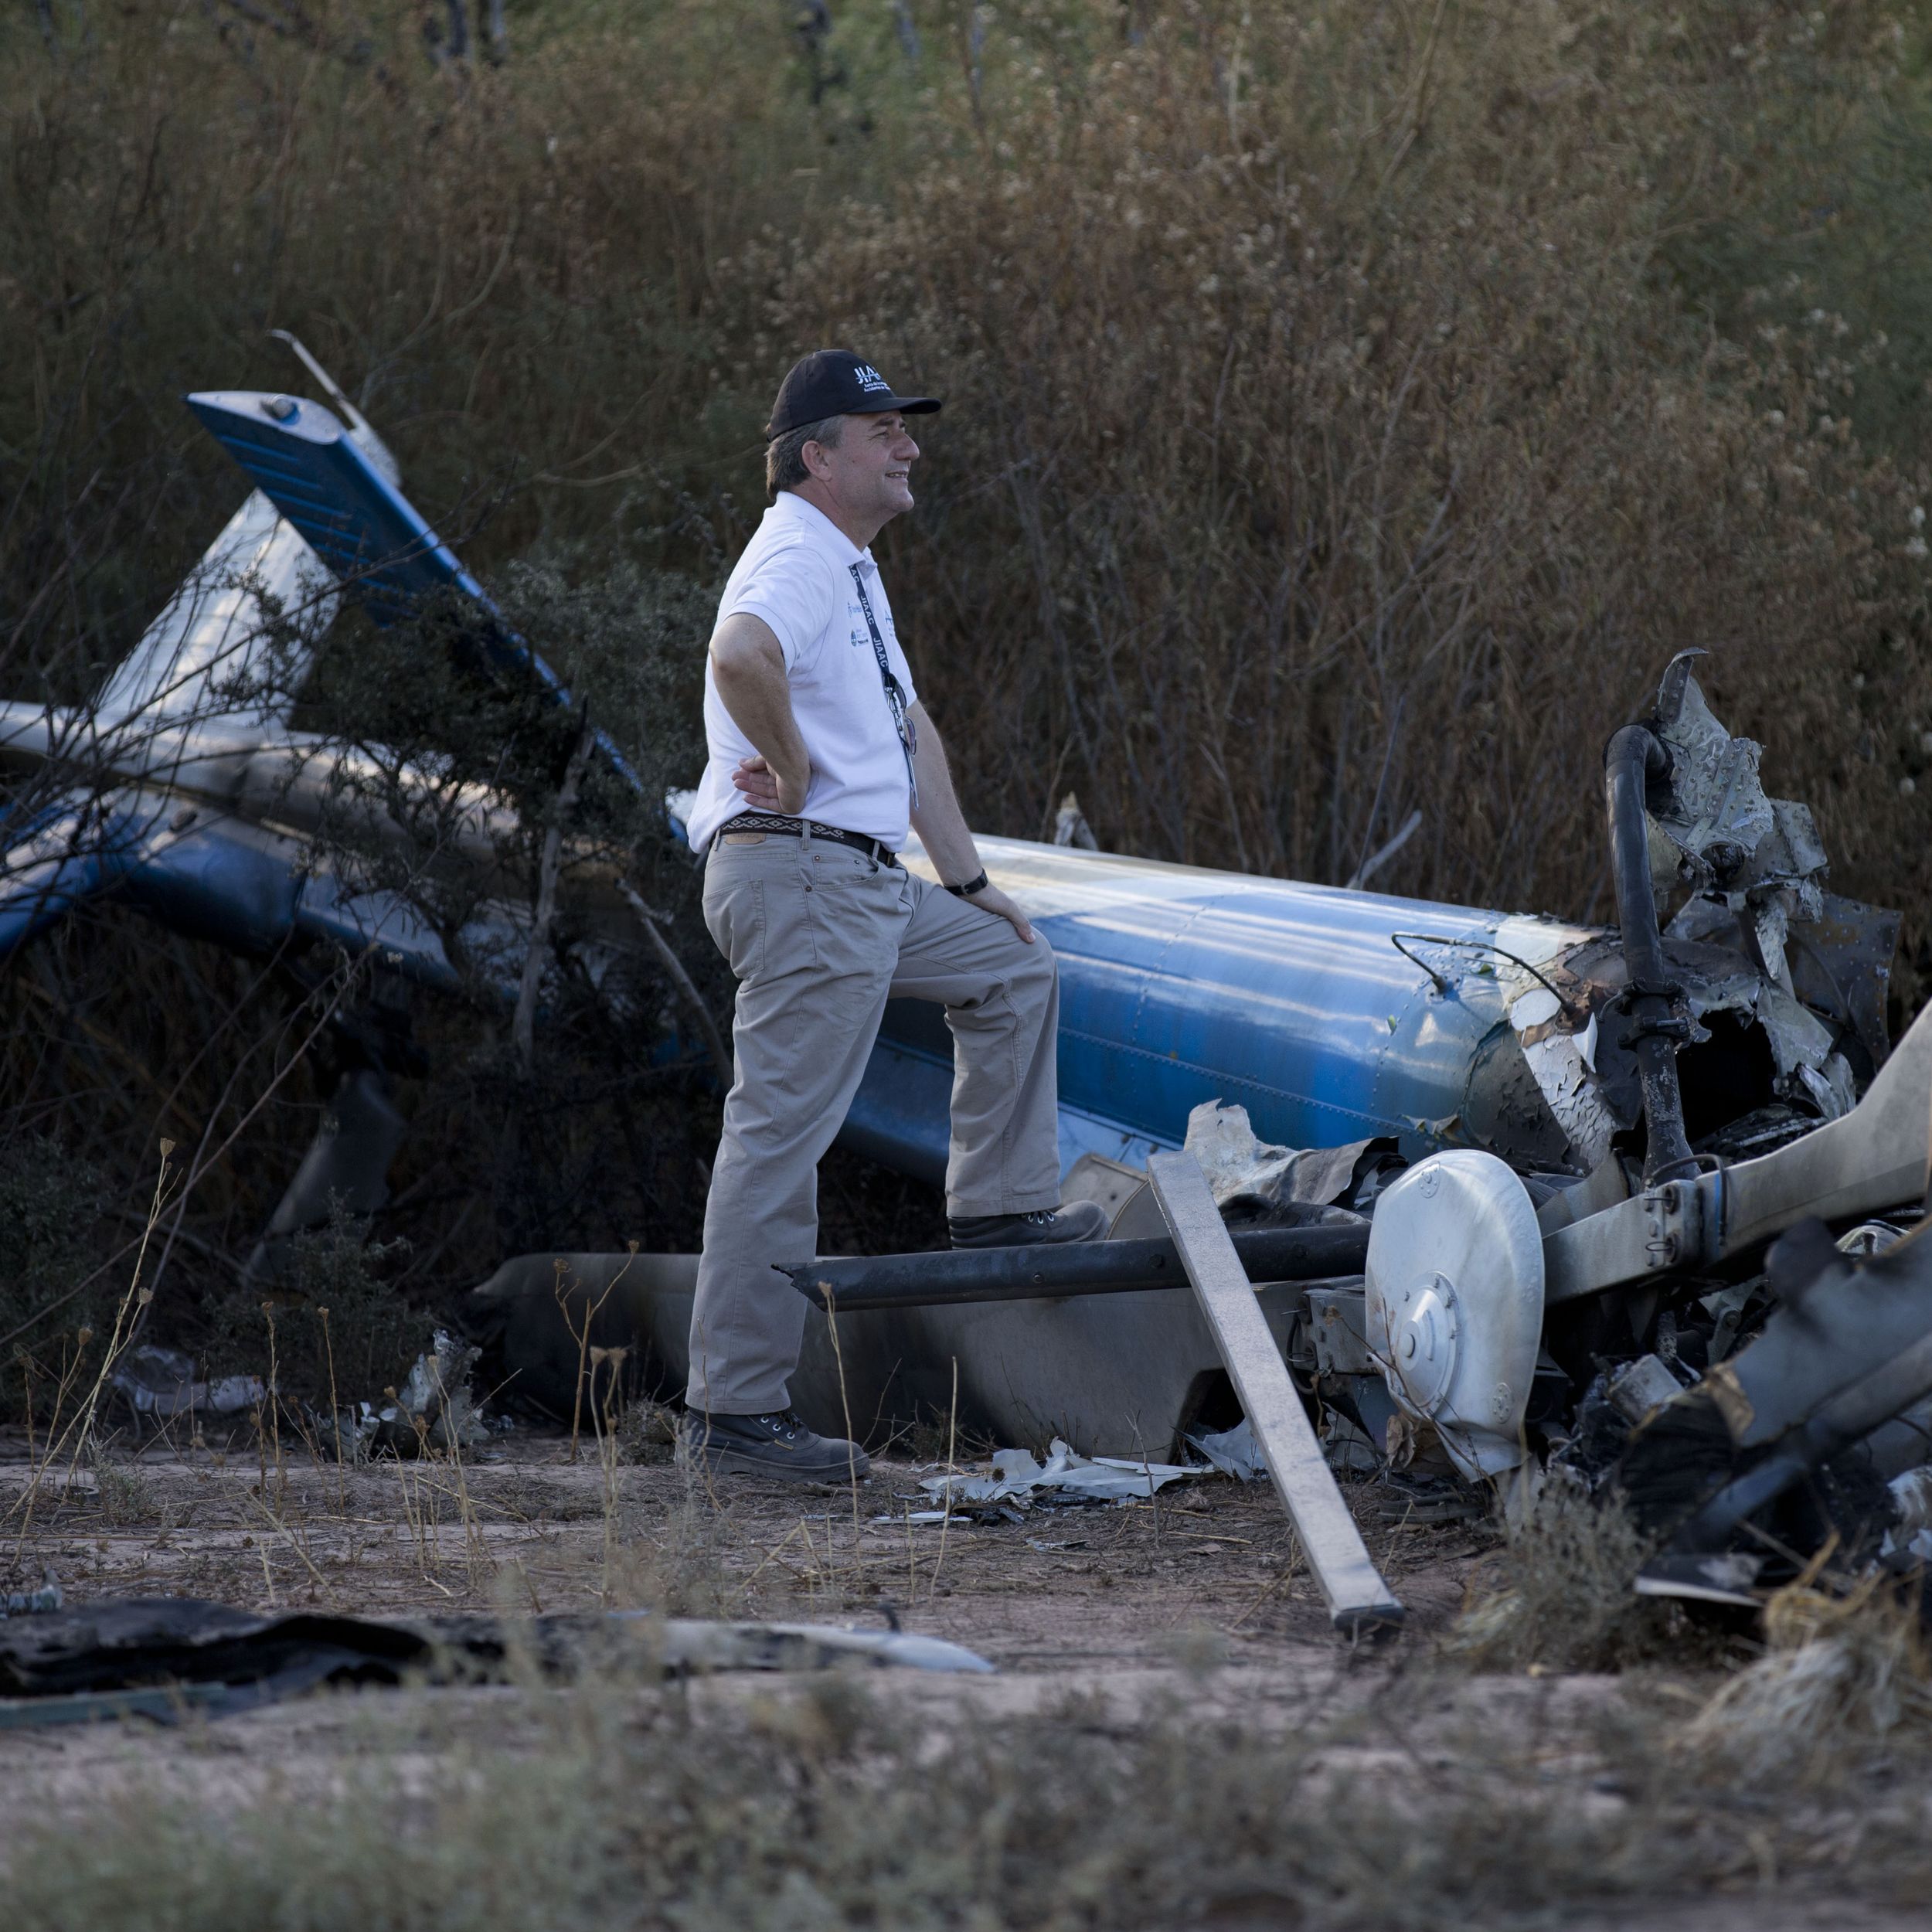 Crash of copters that claimed 10 is latest tied to TV shows | The  Spokesman-Review